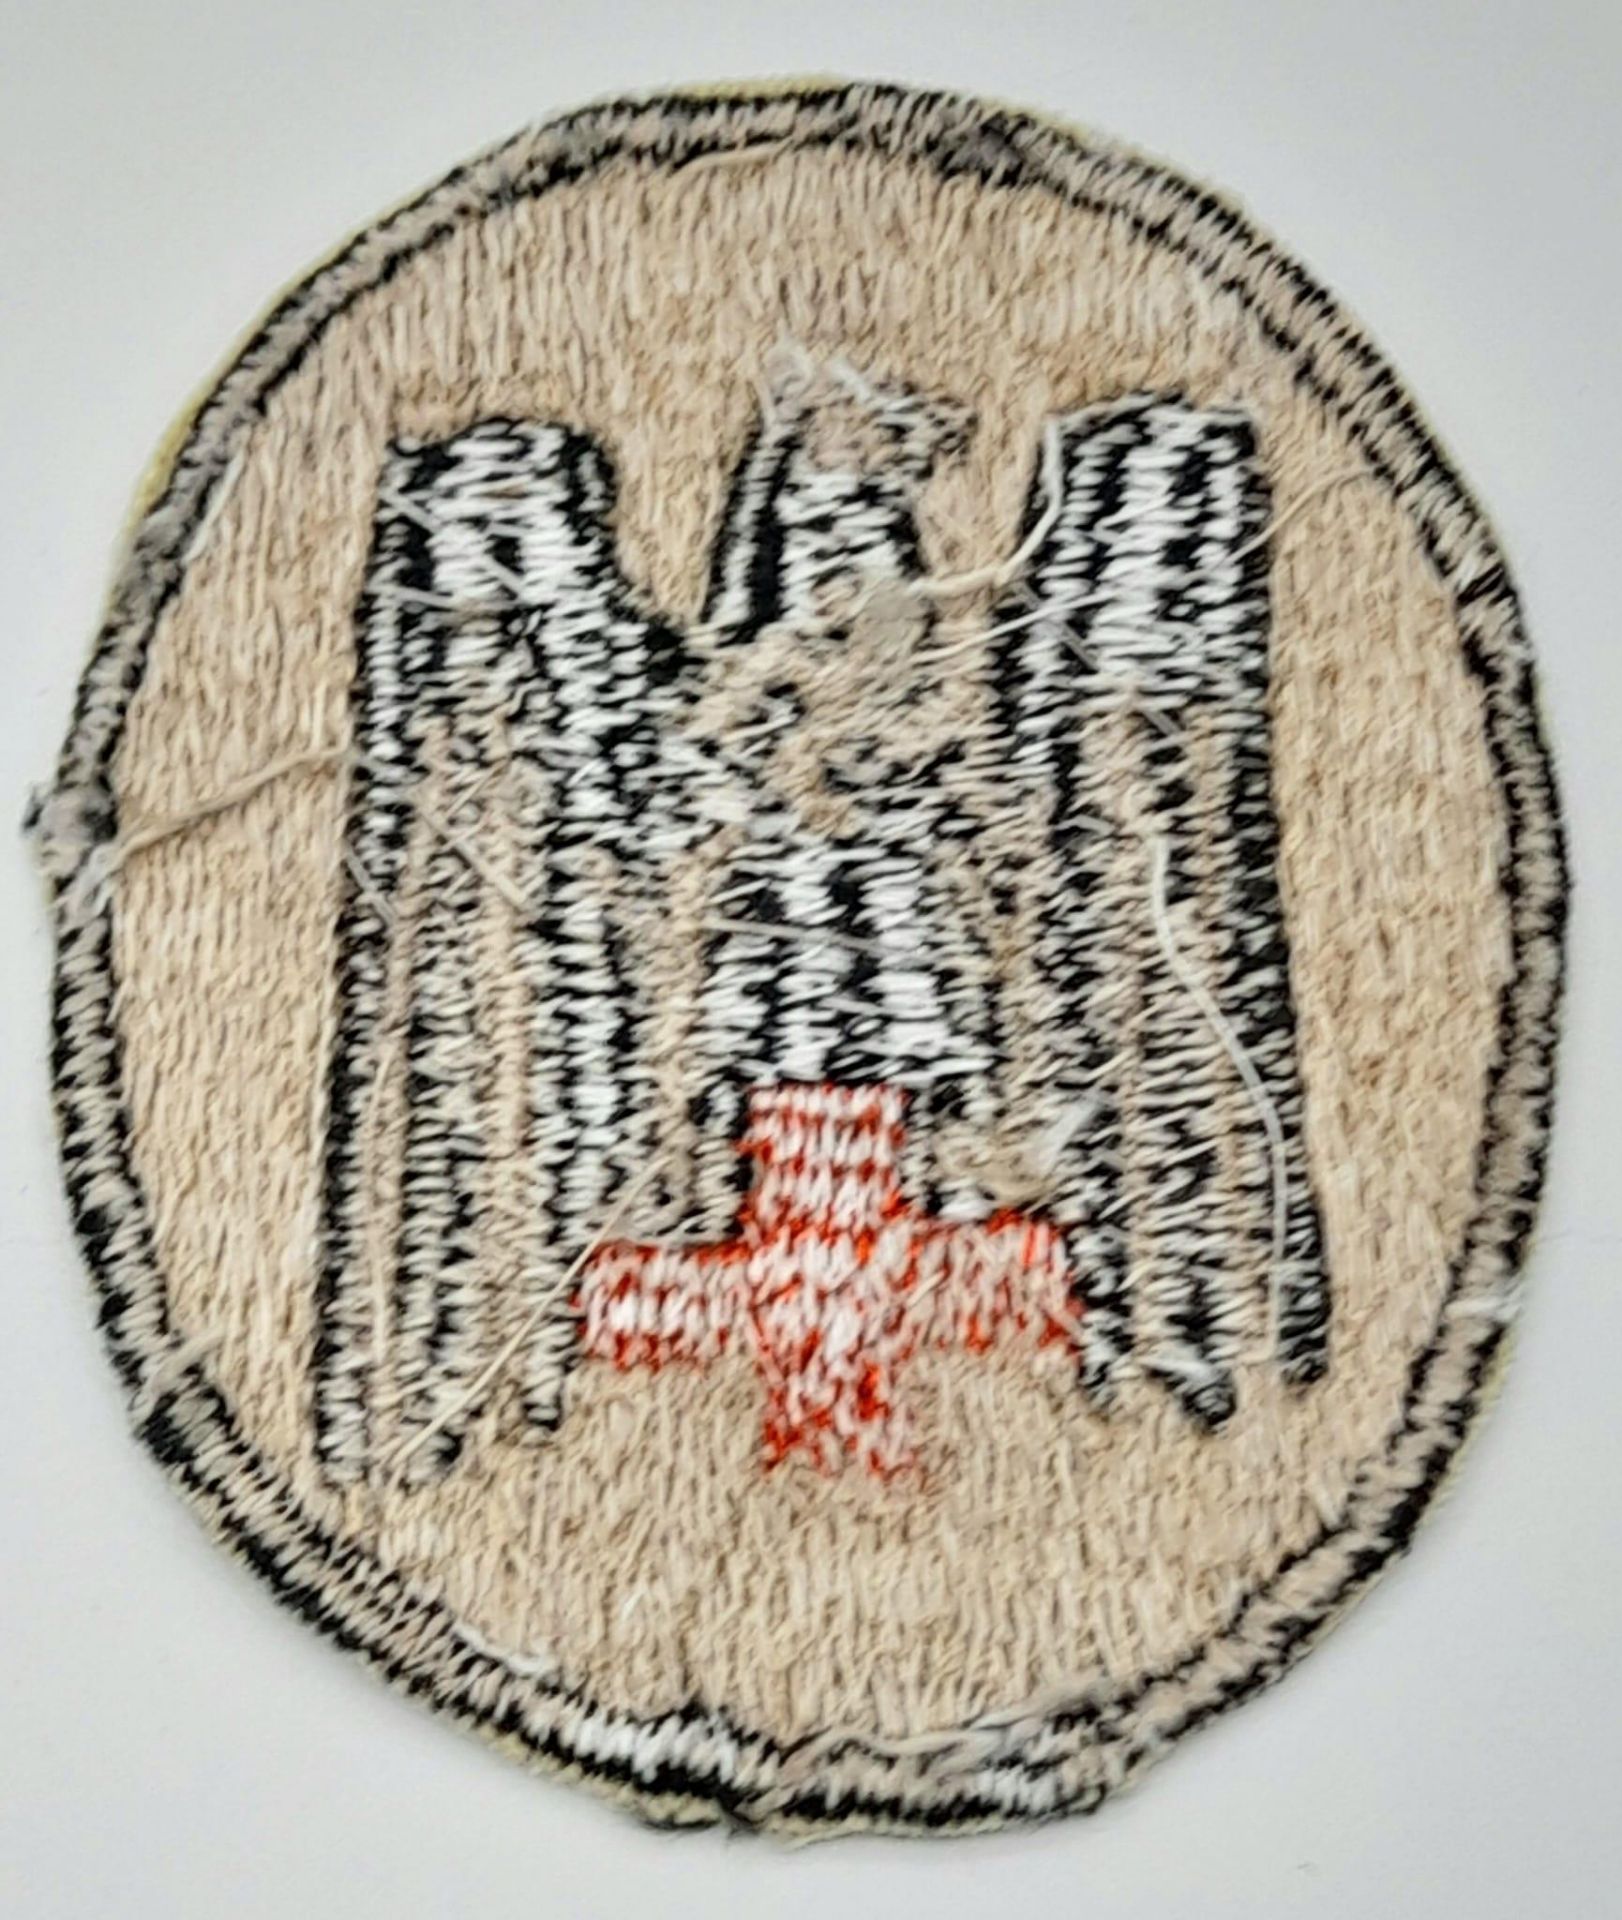 WW2 German DRK (Red Cross) Sports Vest Patch. Most likely locally made. - Image 2 of 2